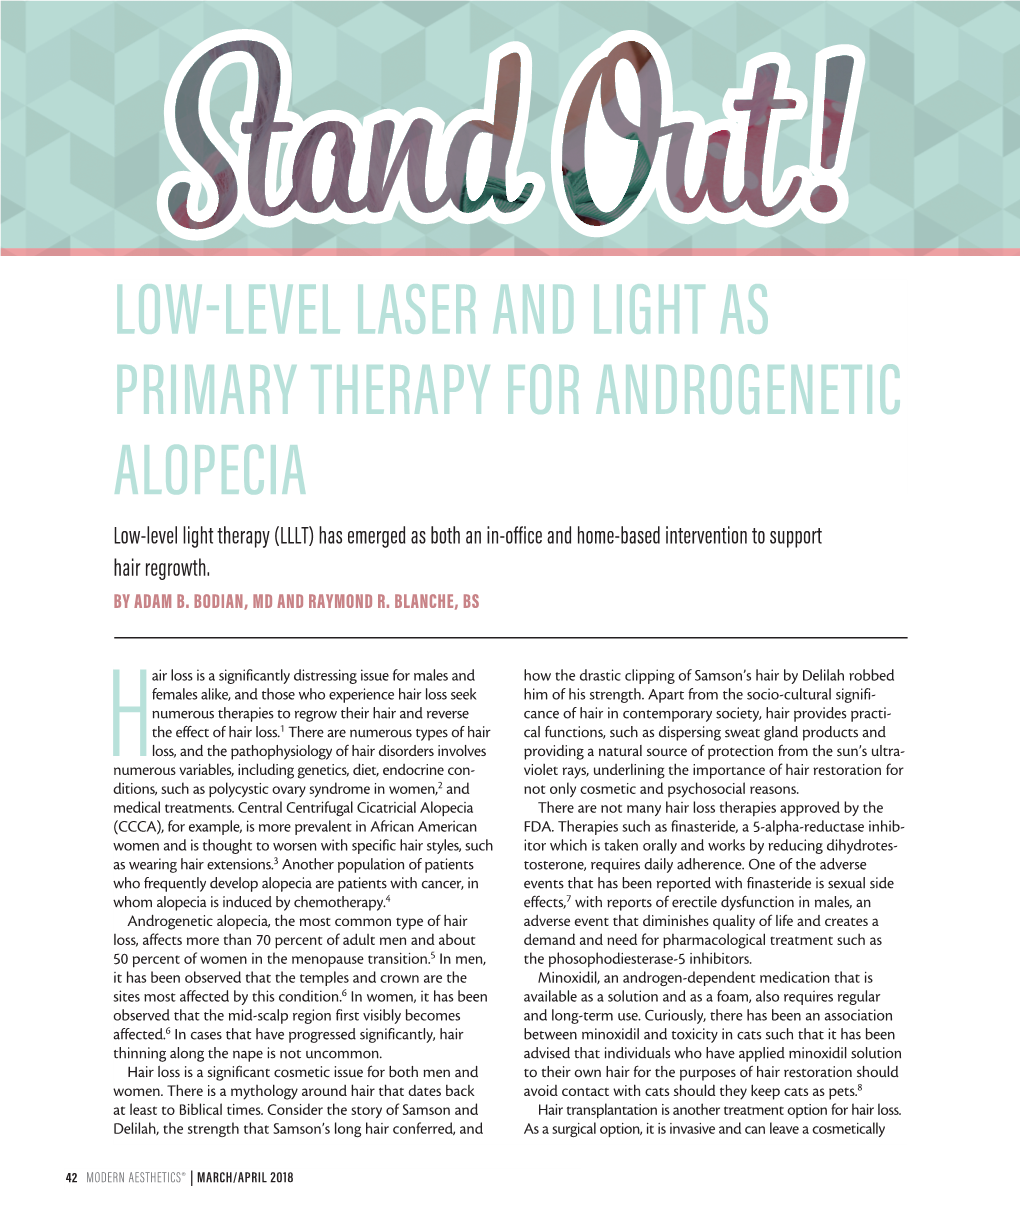 Low-Level Laser and Light As Primary Therapy For